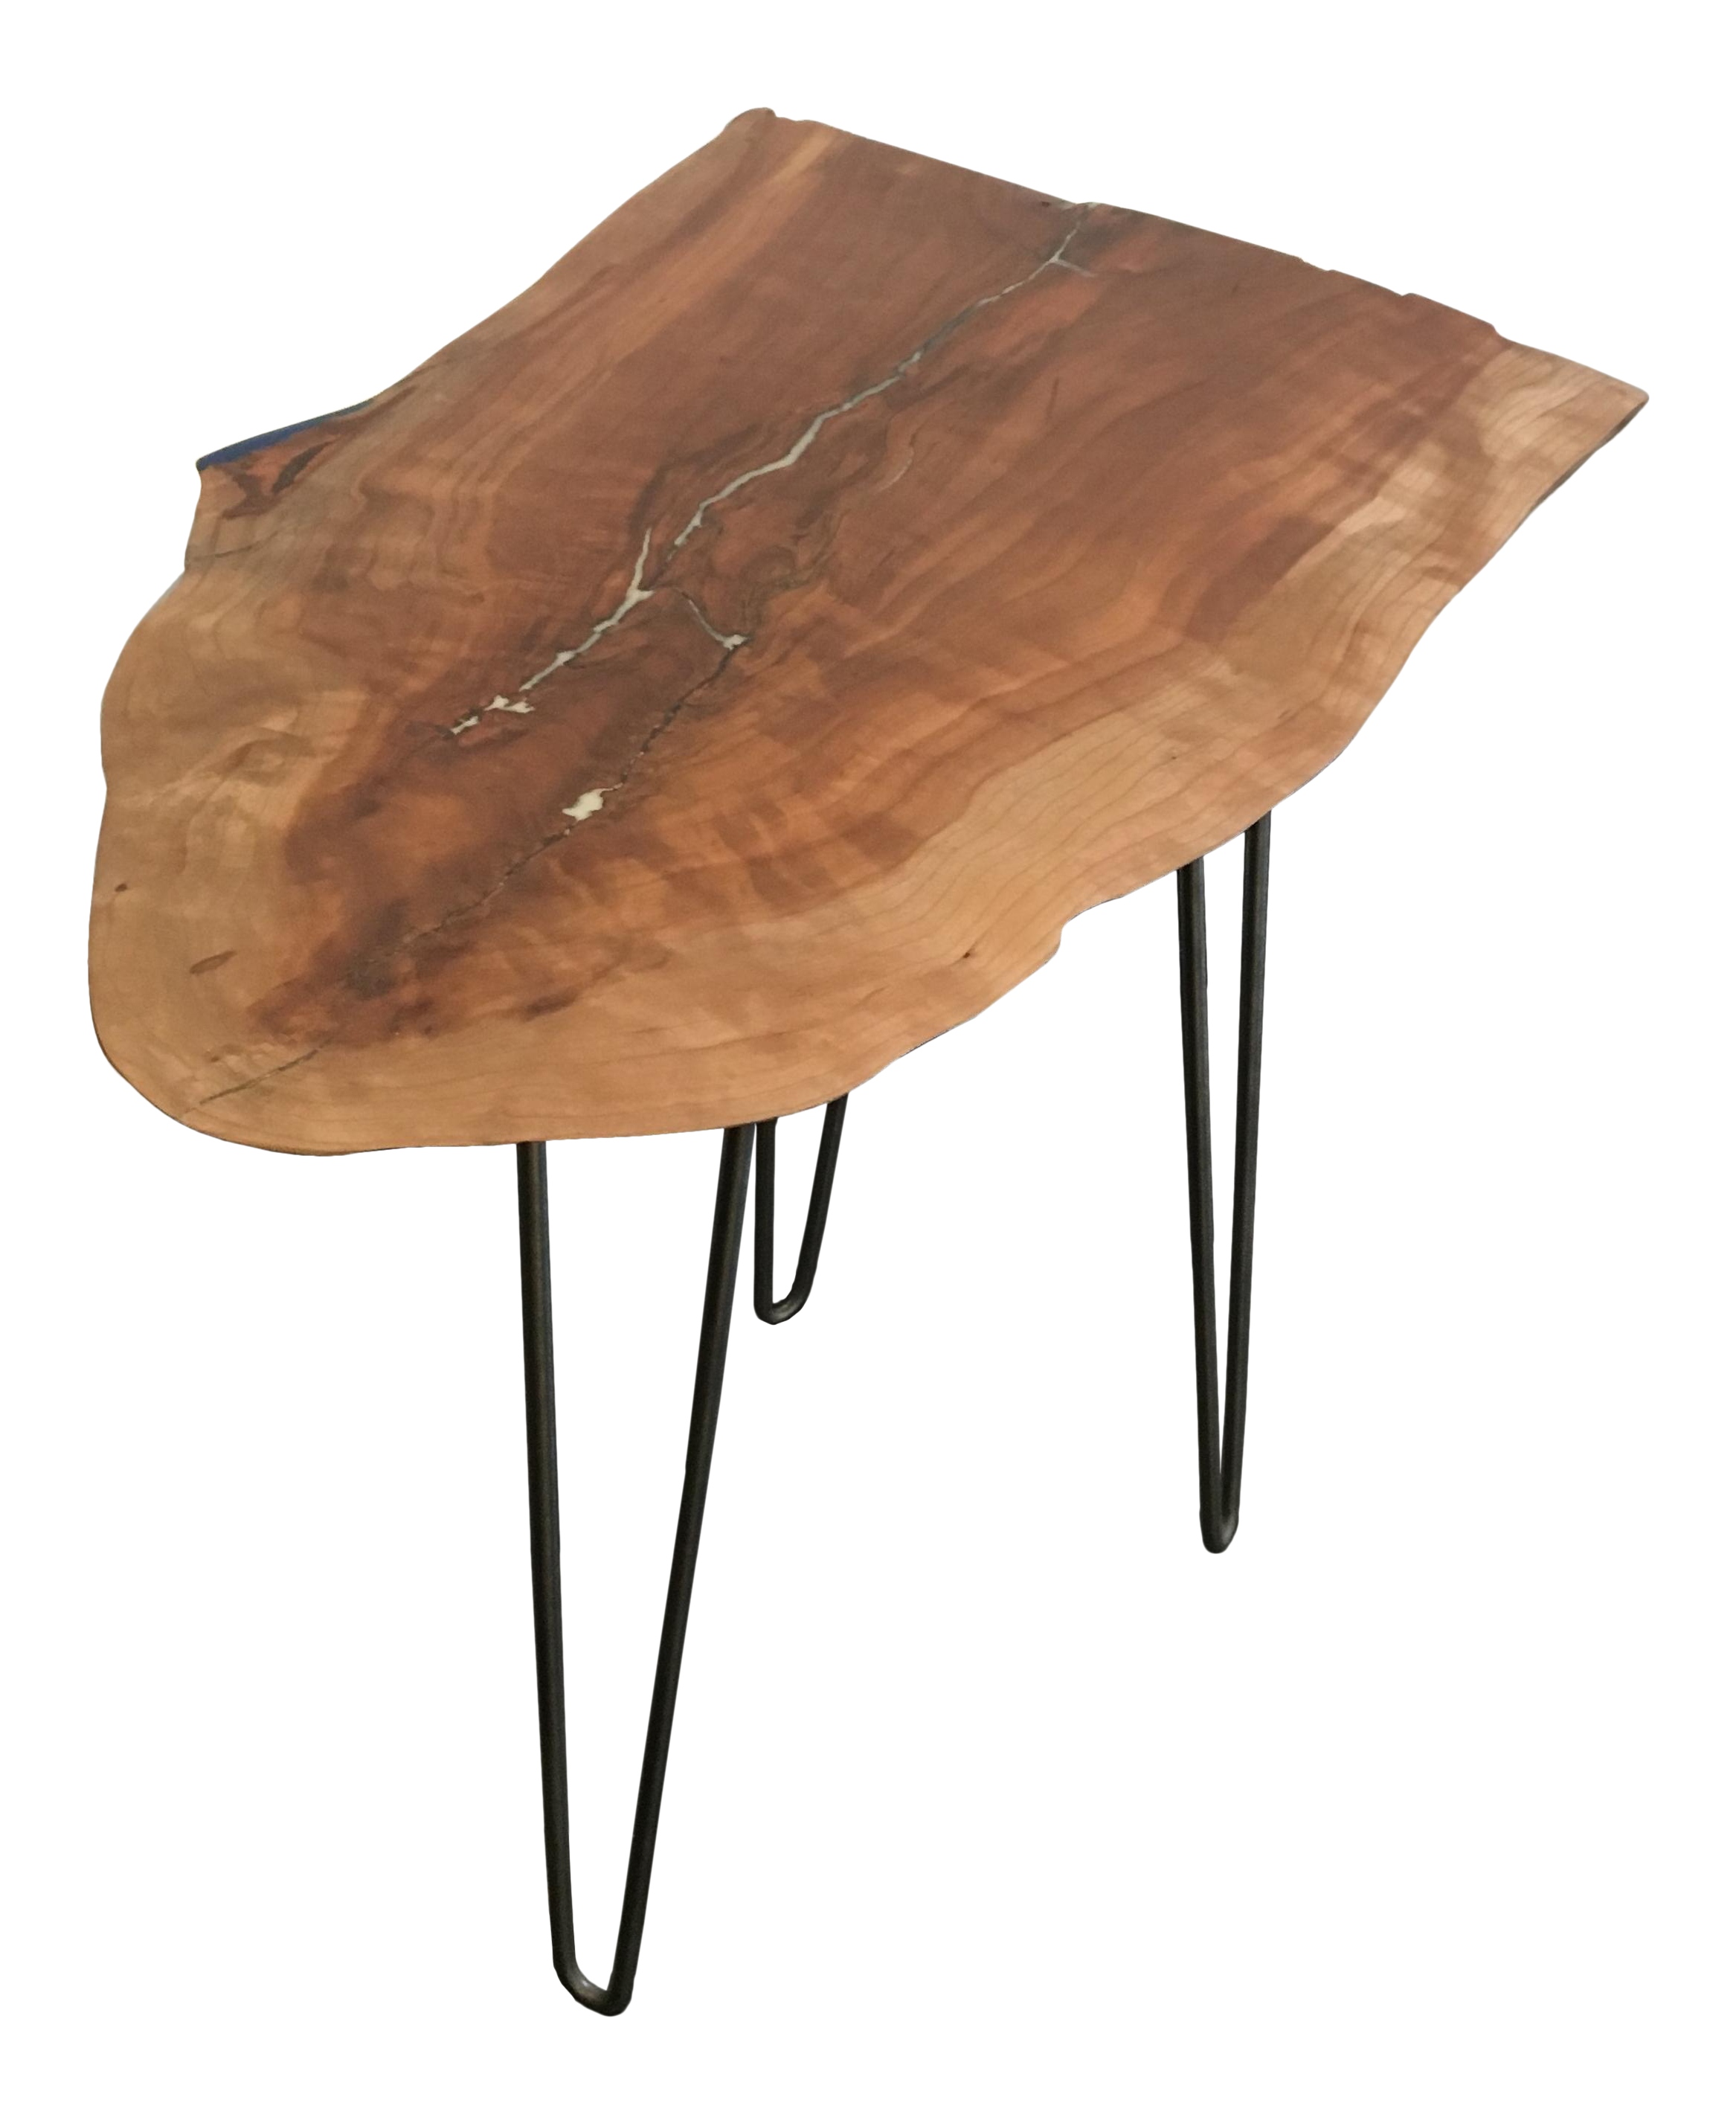 live edge end table with hairpin legs chairish leg accent pub dining set pine trestle whole tablecloths for weddings countertop room sets chinese garden stool home decor ornaments